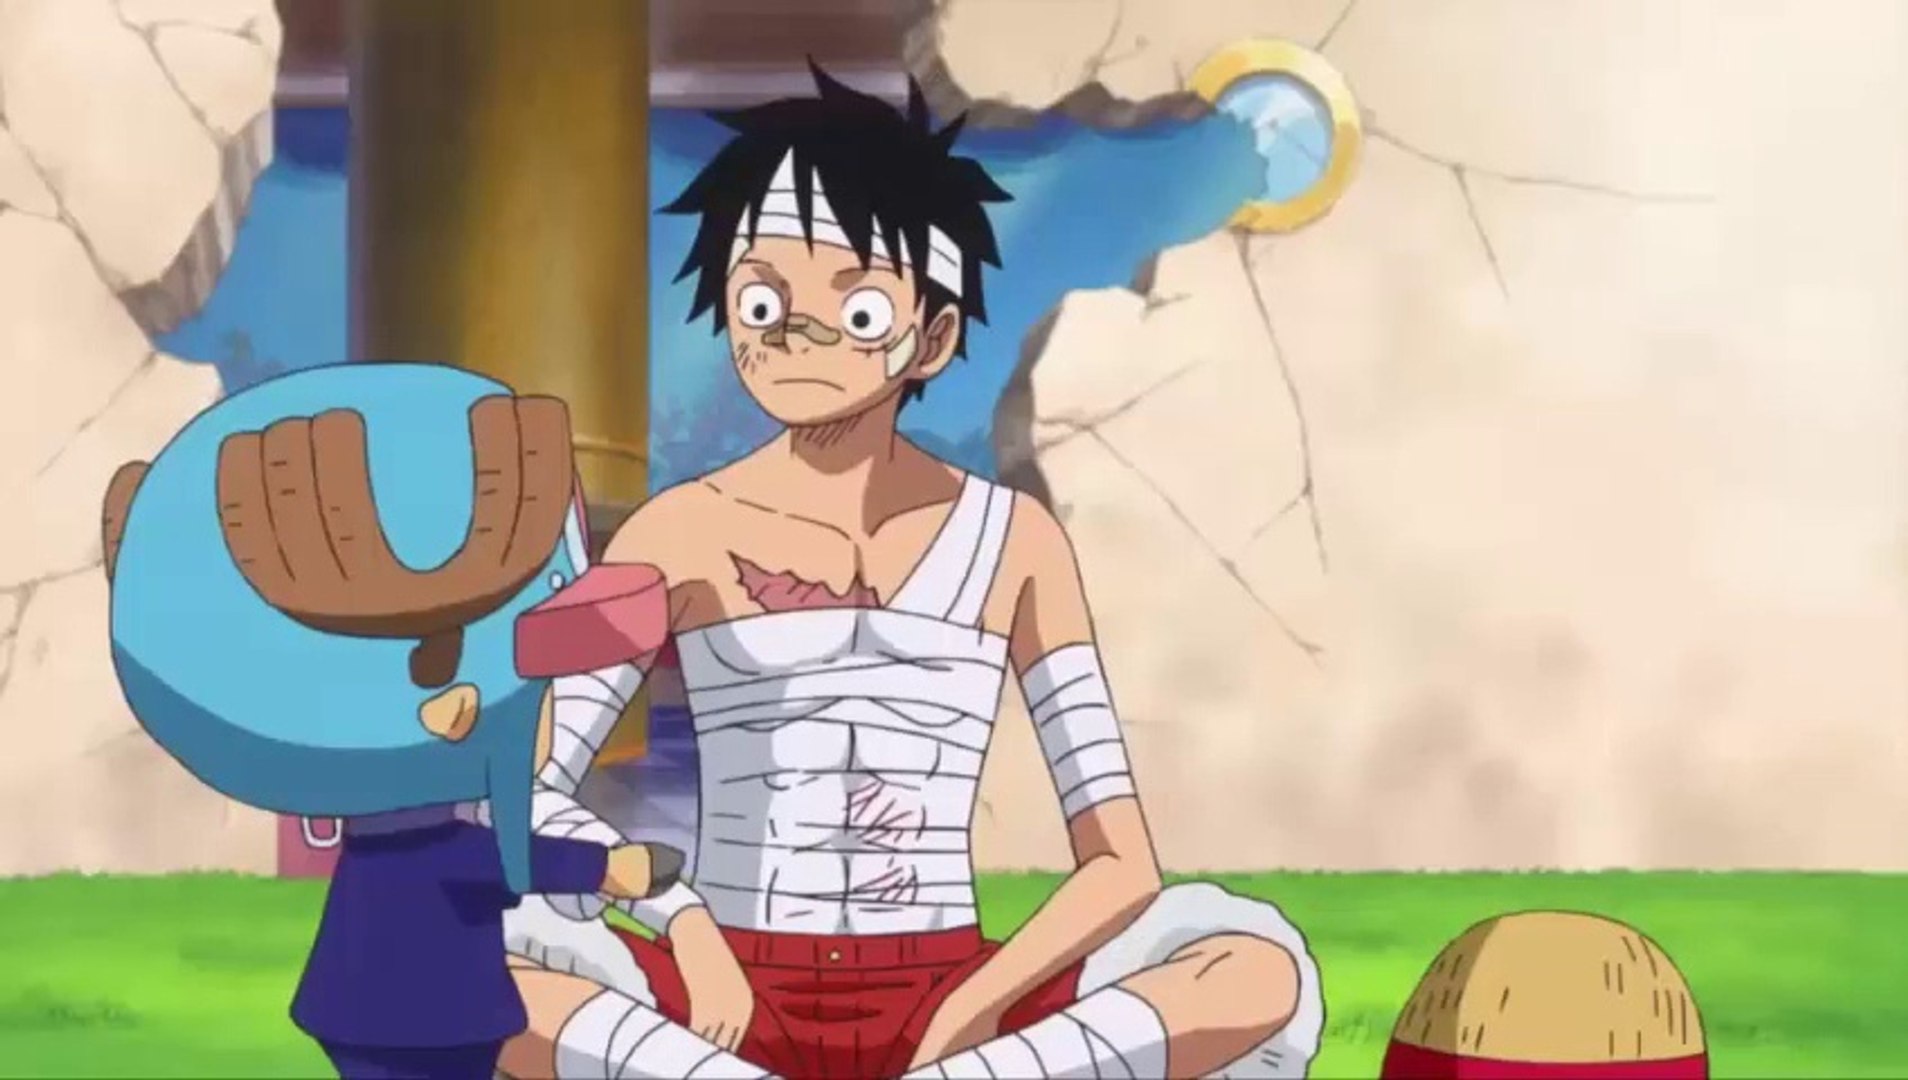 One Piece episode 880 synopsis, spoilers and watch online